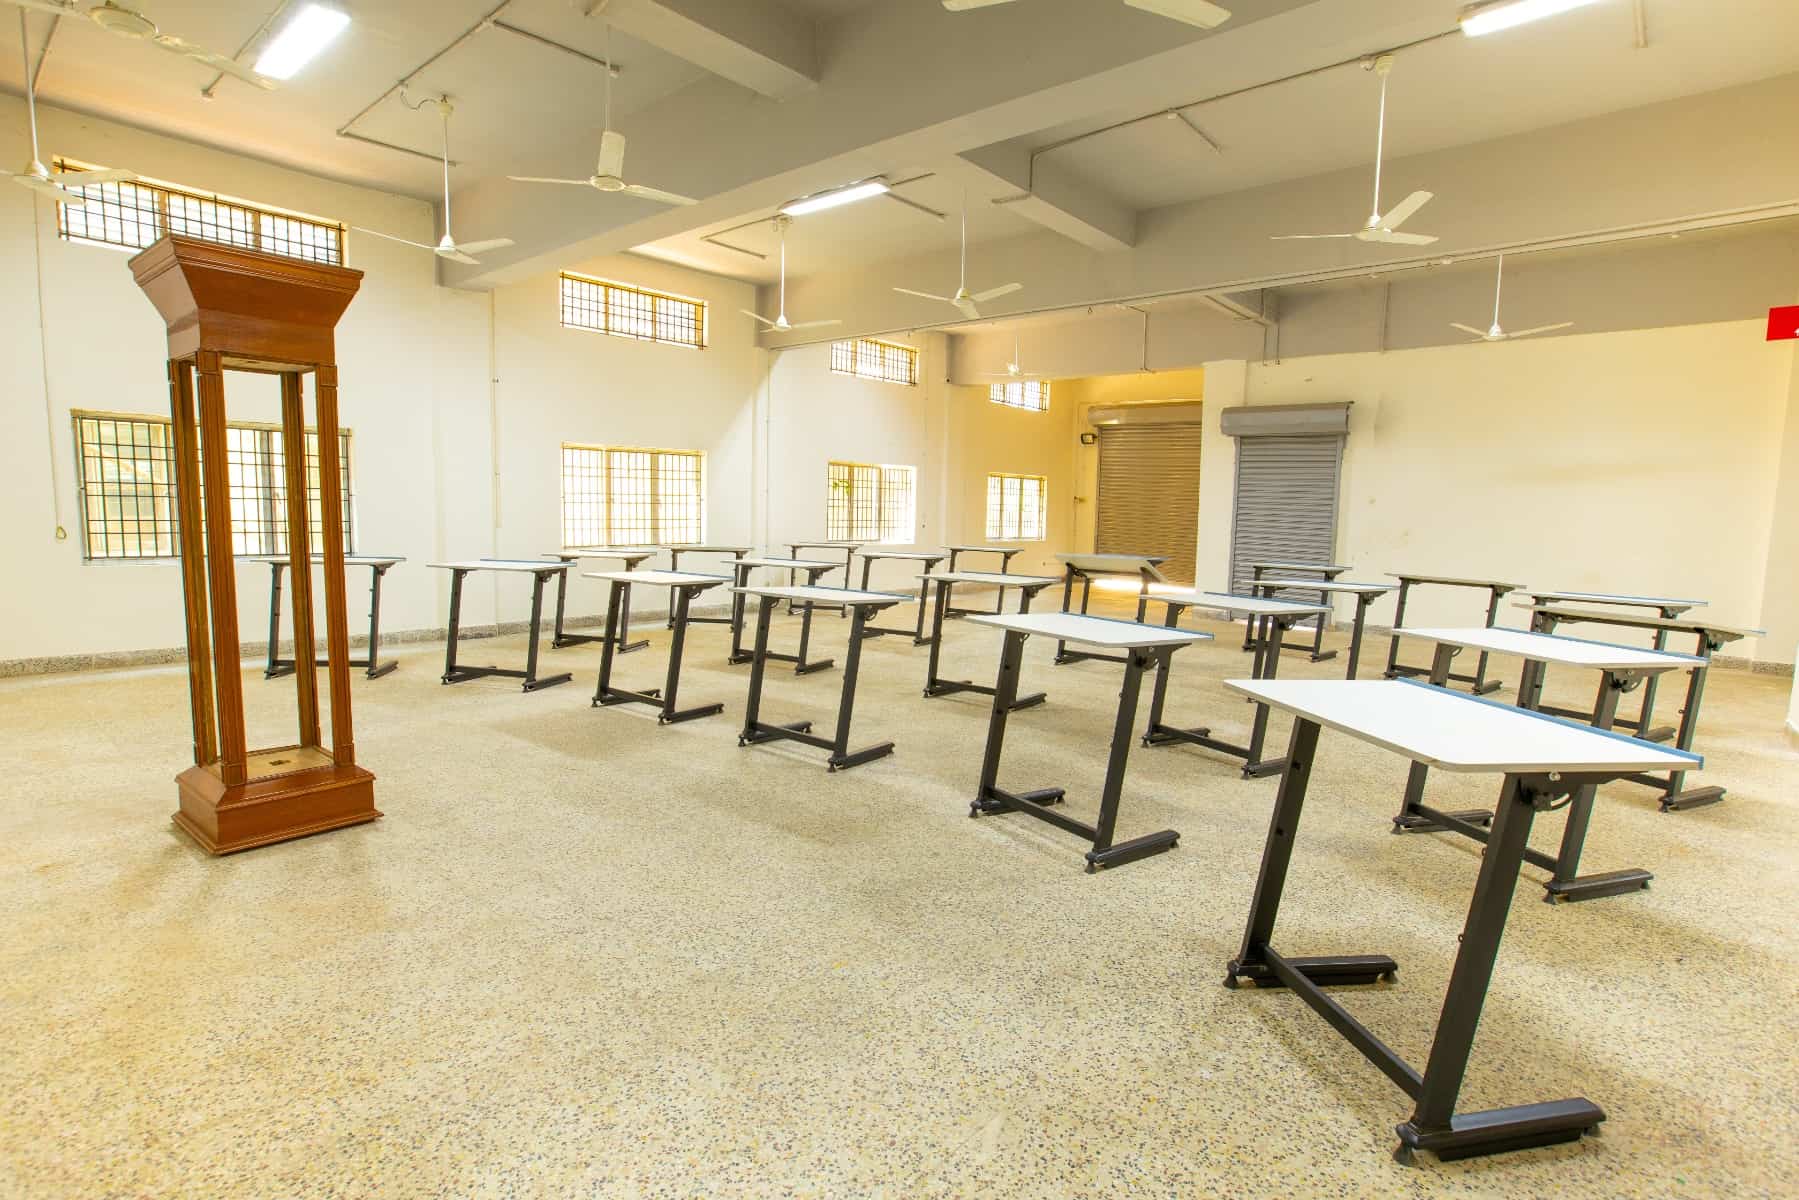 Spacious live sketching area at a design college in India